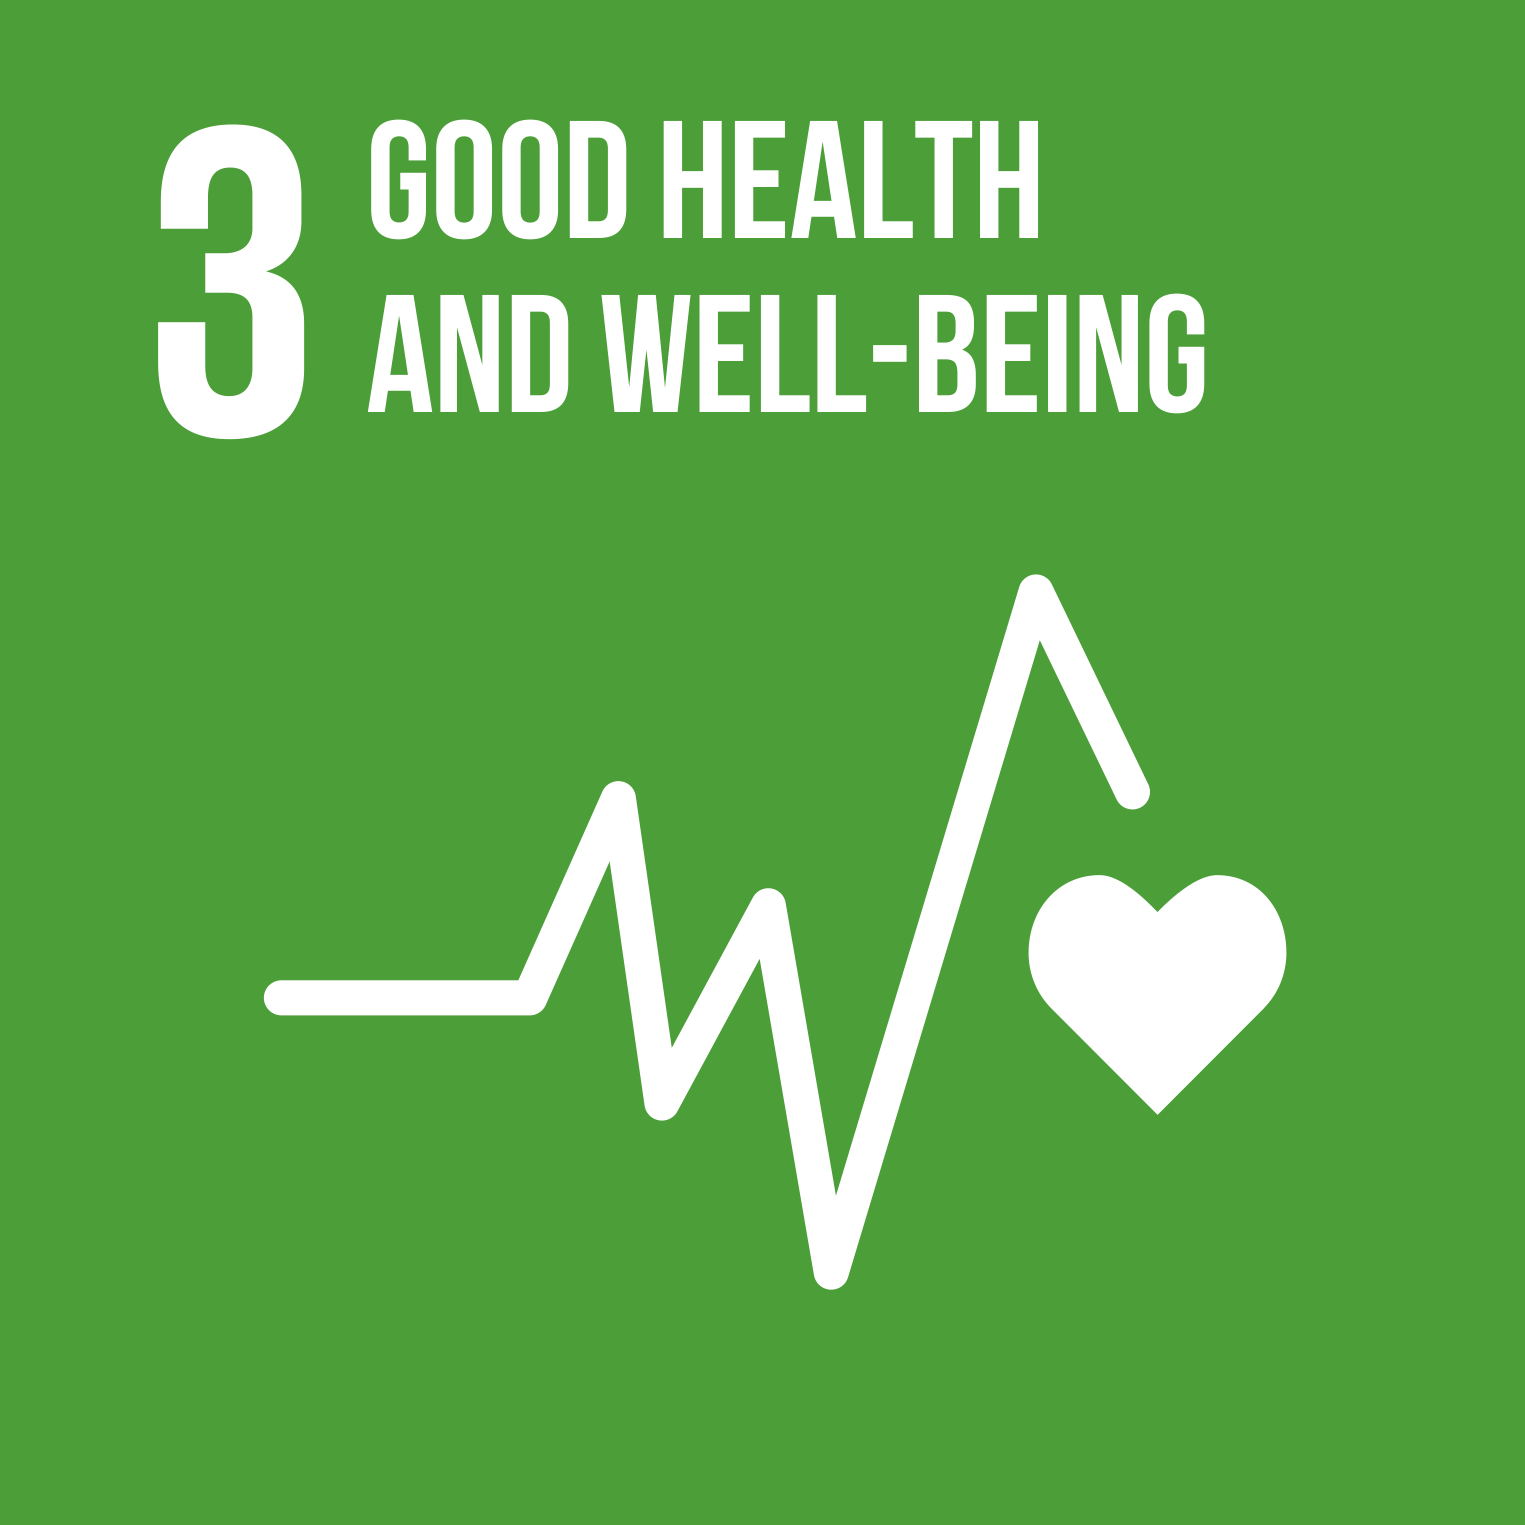 【SDG 3】Good Health And Well-Being